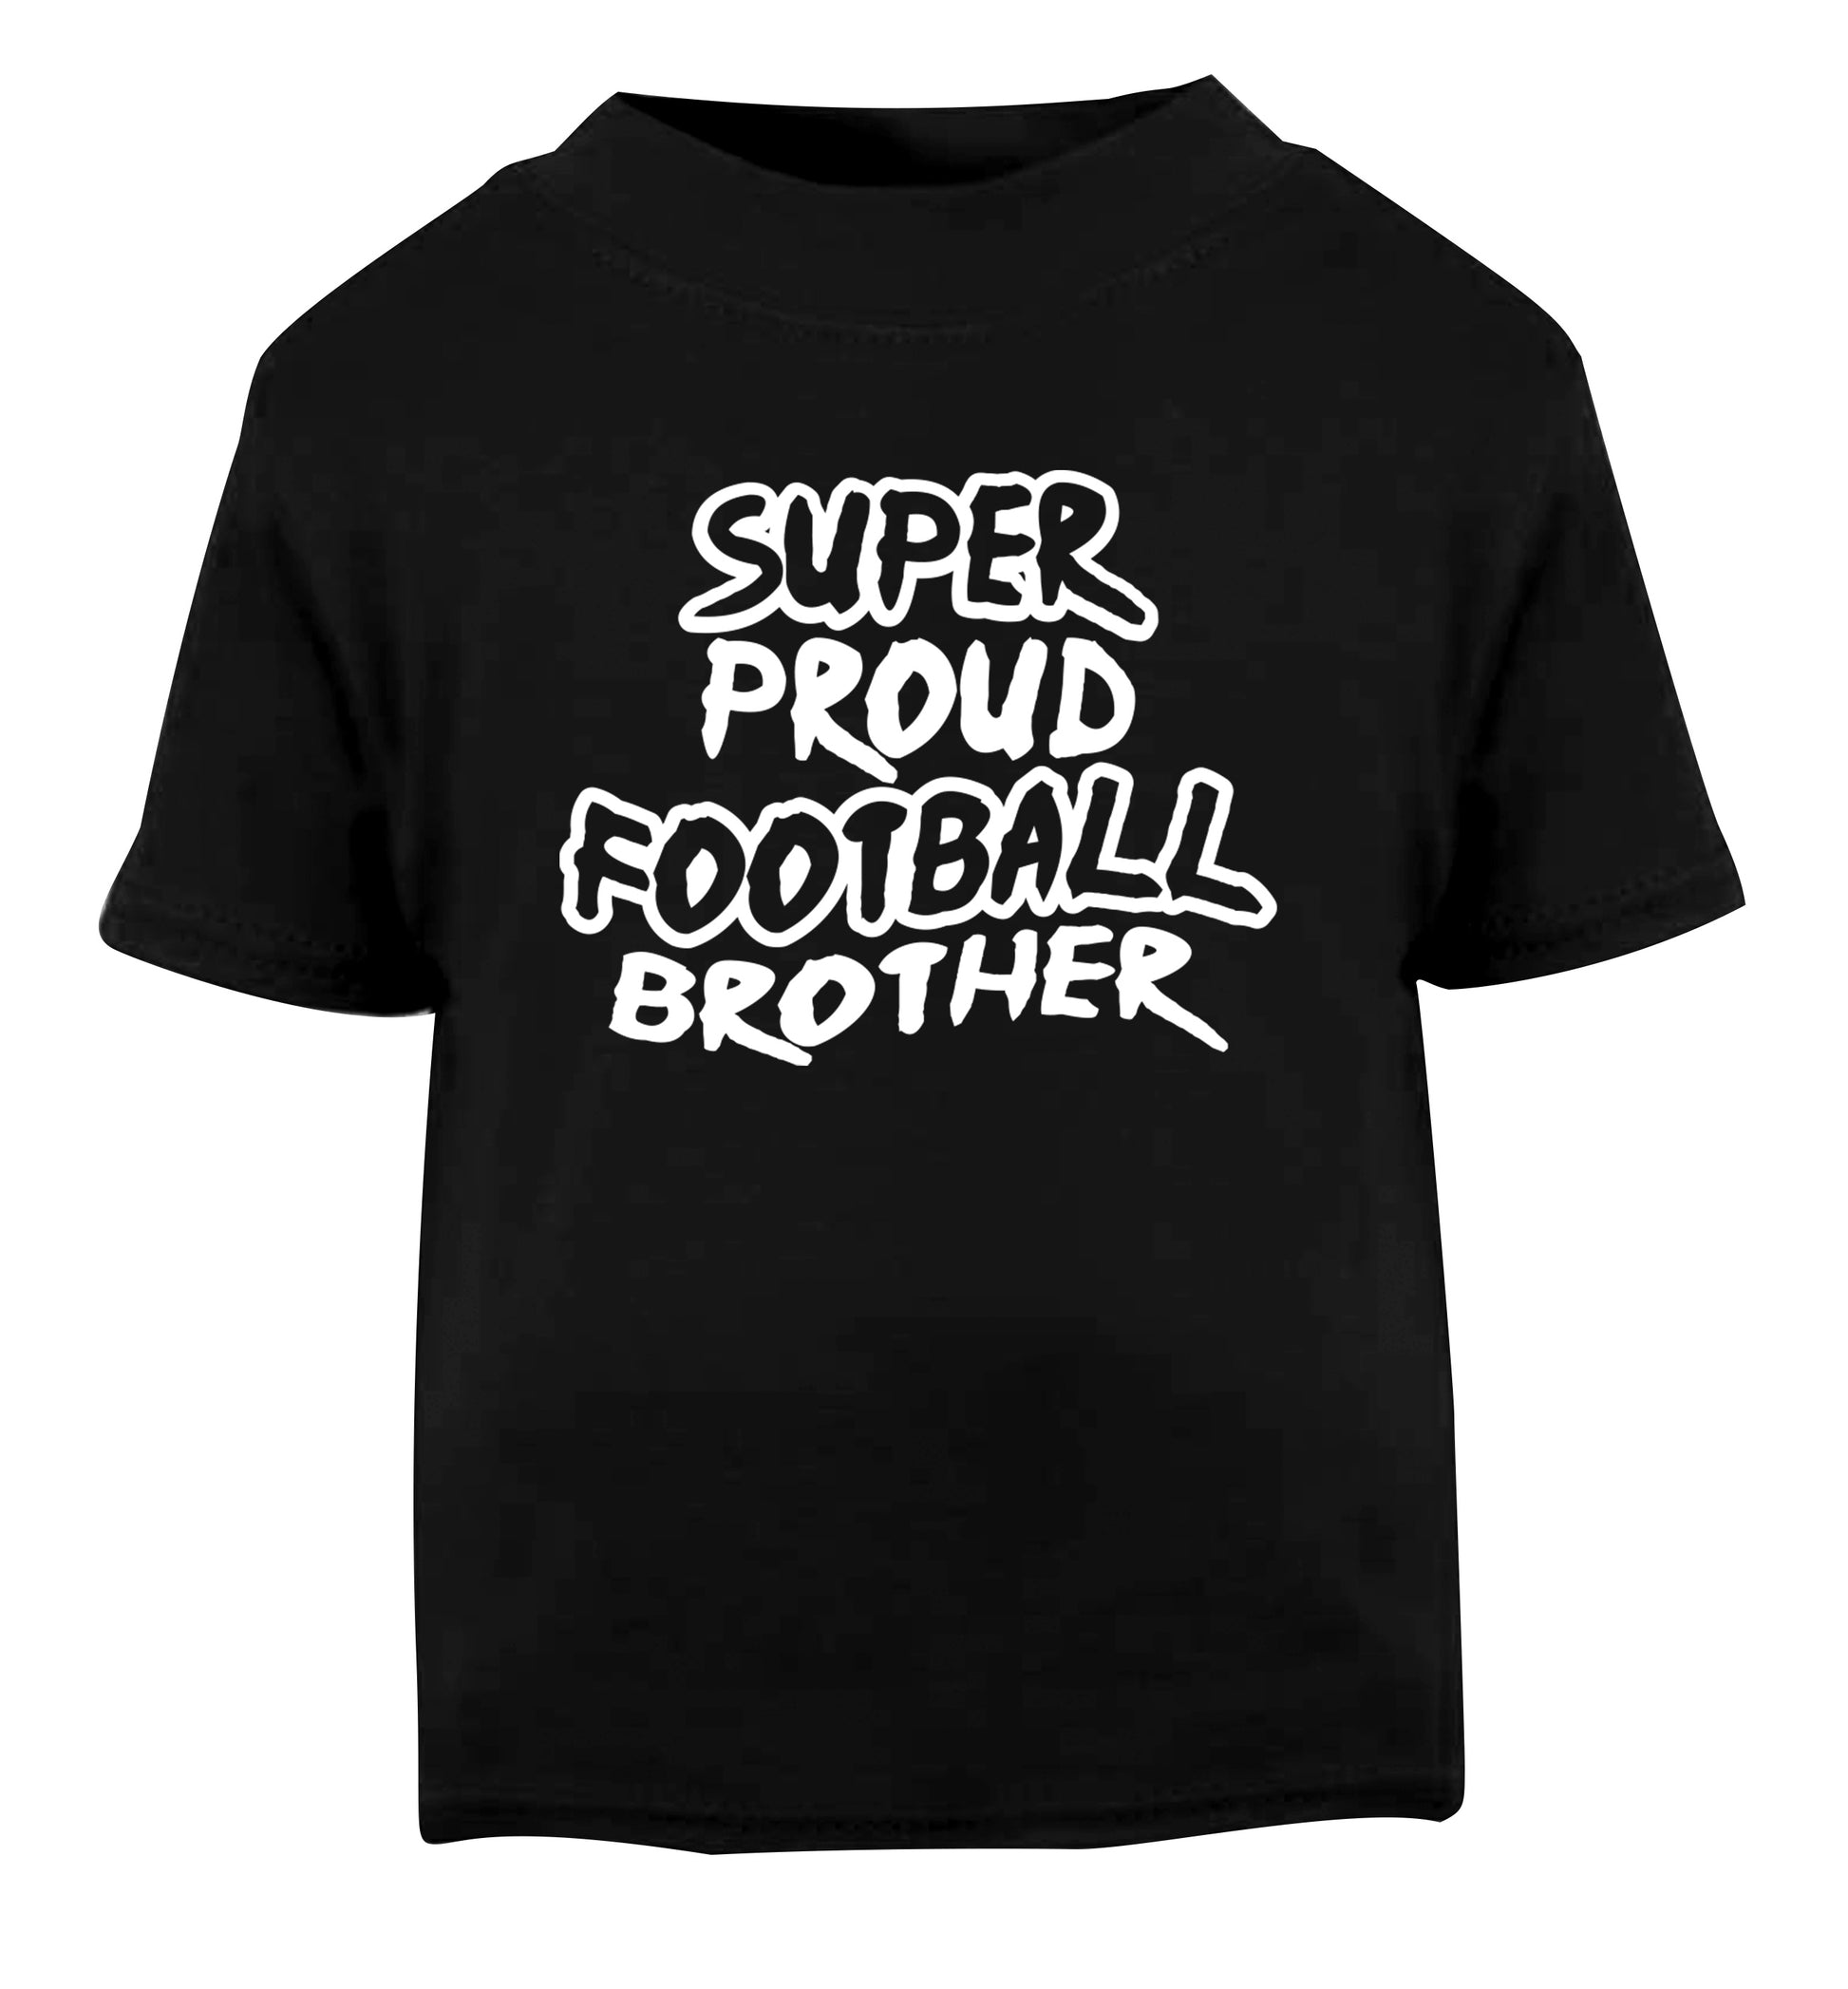 Super proud football brother Black Baby Toddler Tshirt 2 years